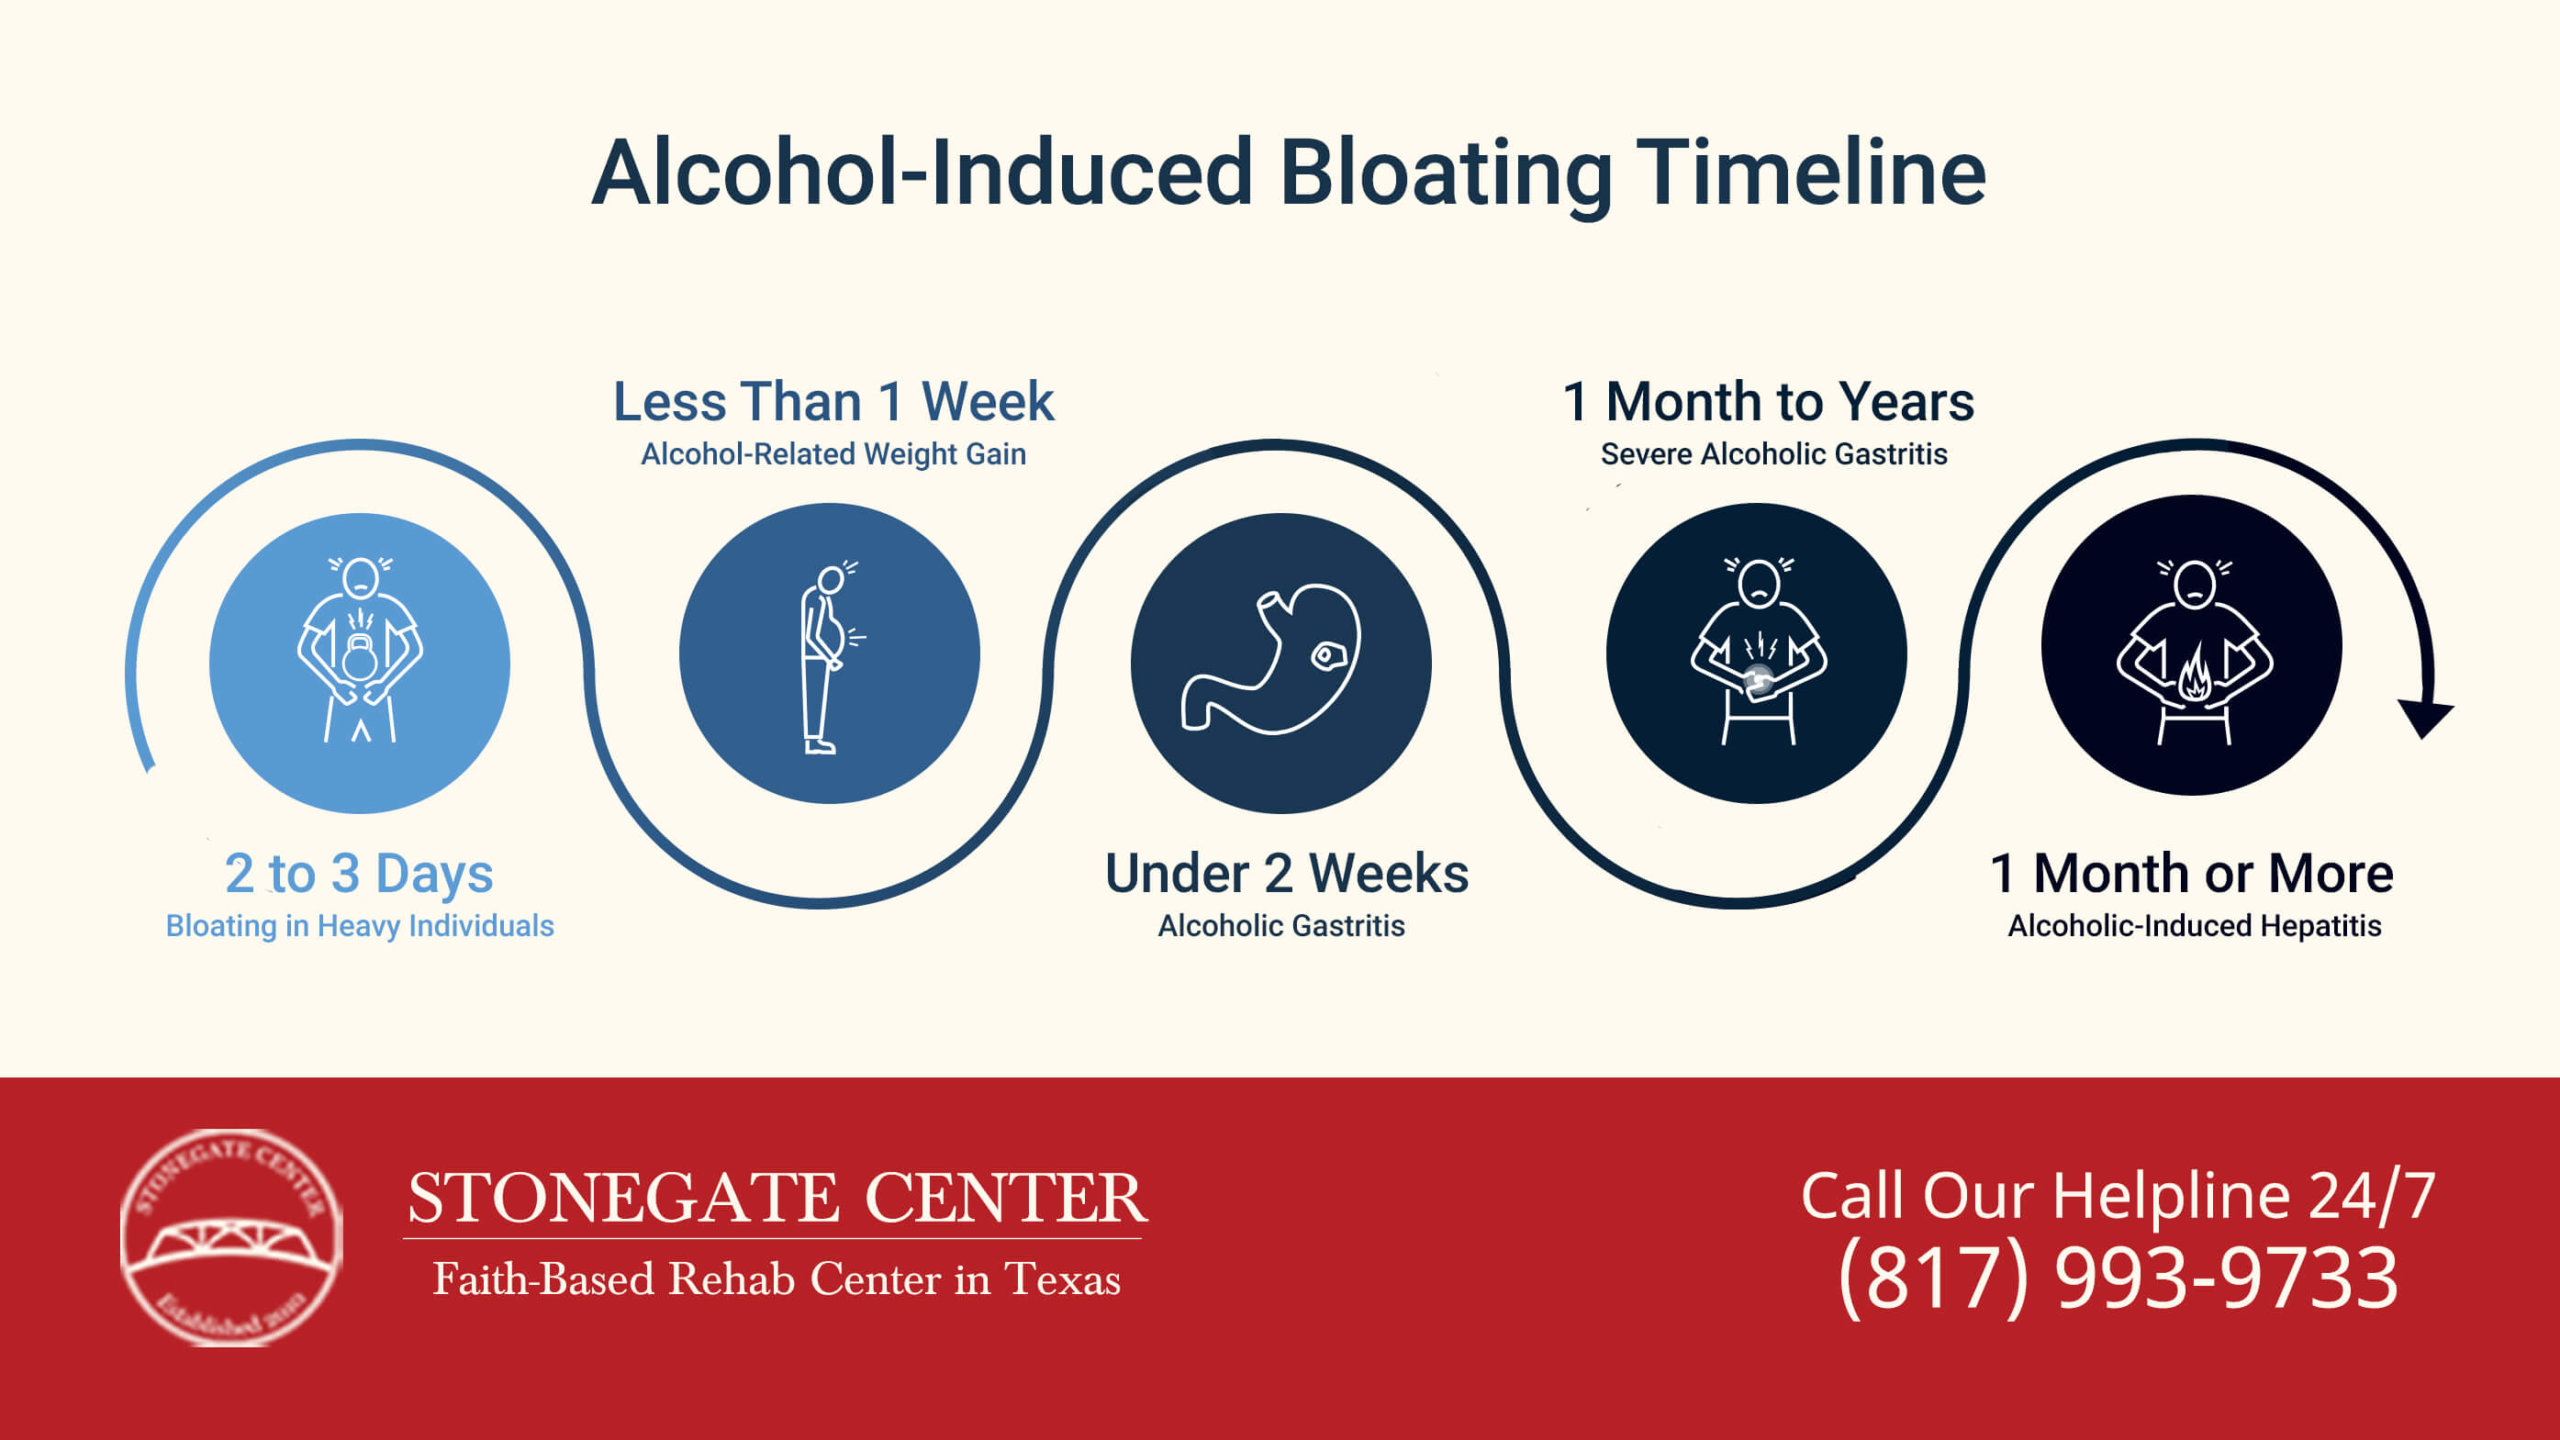 Stonegate Center Blog - Alcohol & Your Stomach: How Long Does Alcohol Bloating Last? - Alcohol Induced Bloating Timeline